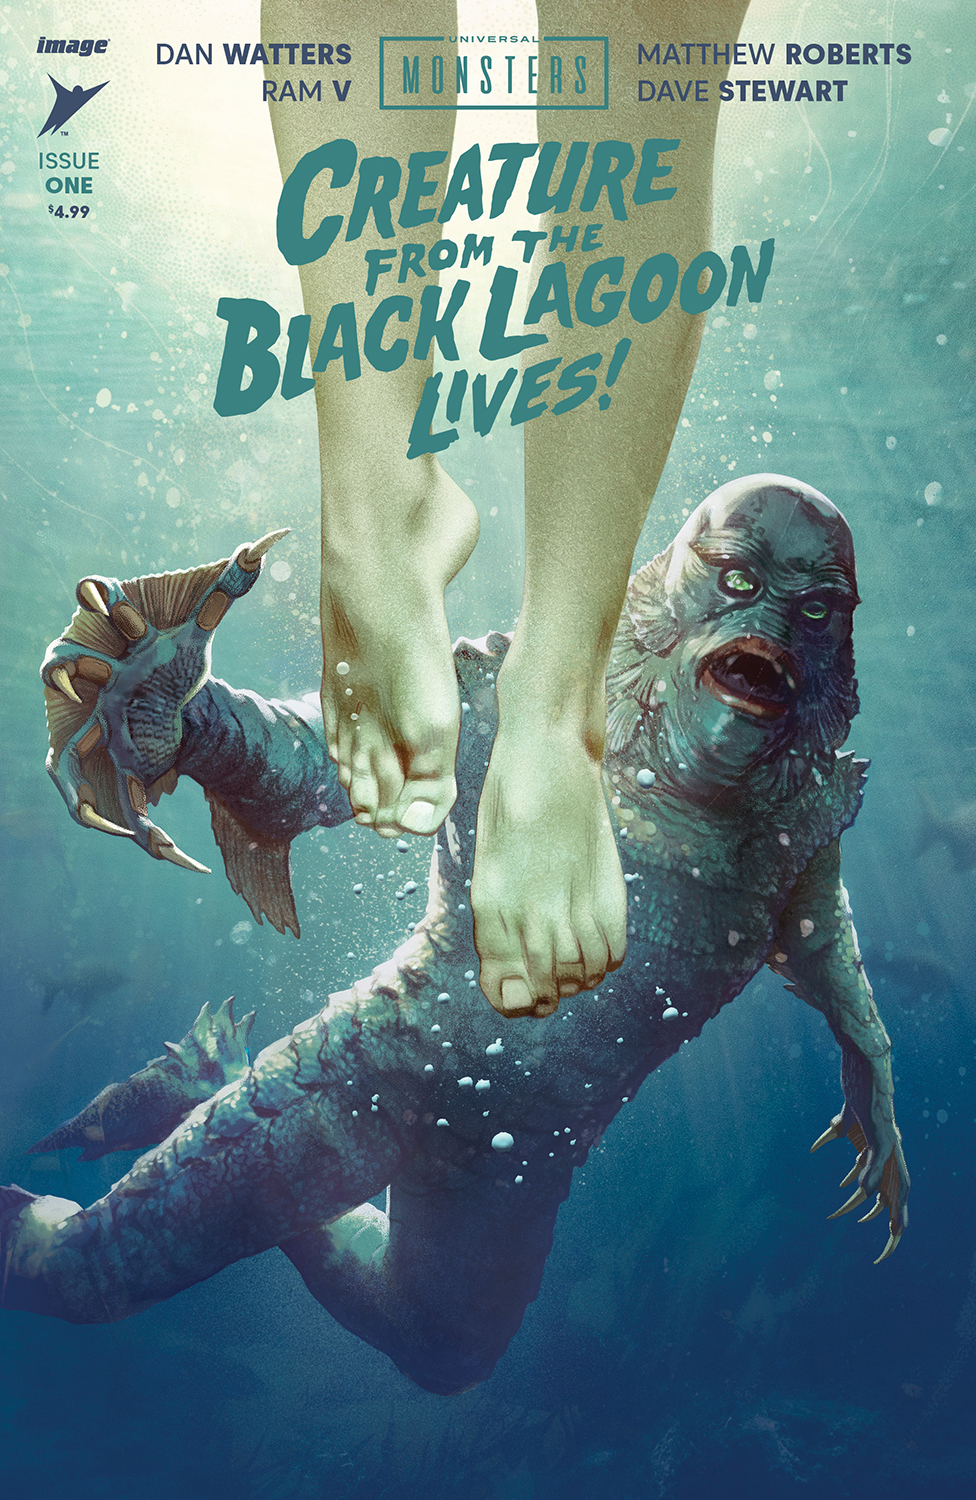 Universal Monsters the Creature from the Black Lagoon Lives #1 Cover B Joshua Middleton Varia (Of 4)